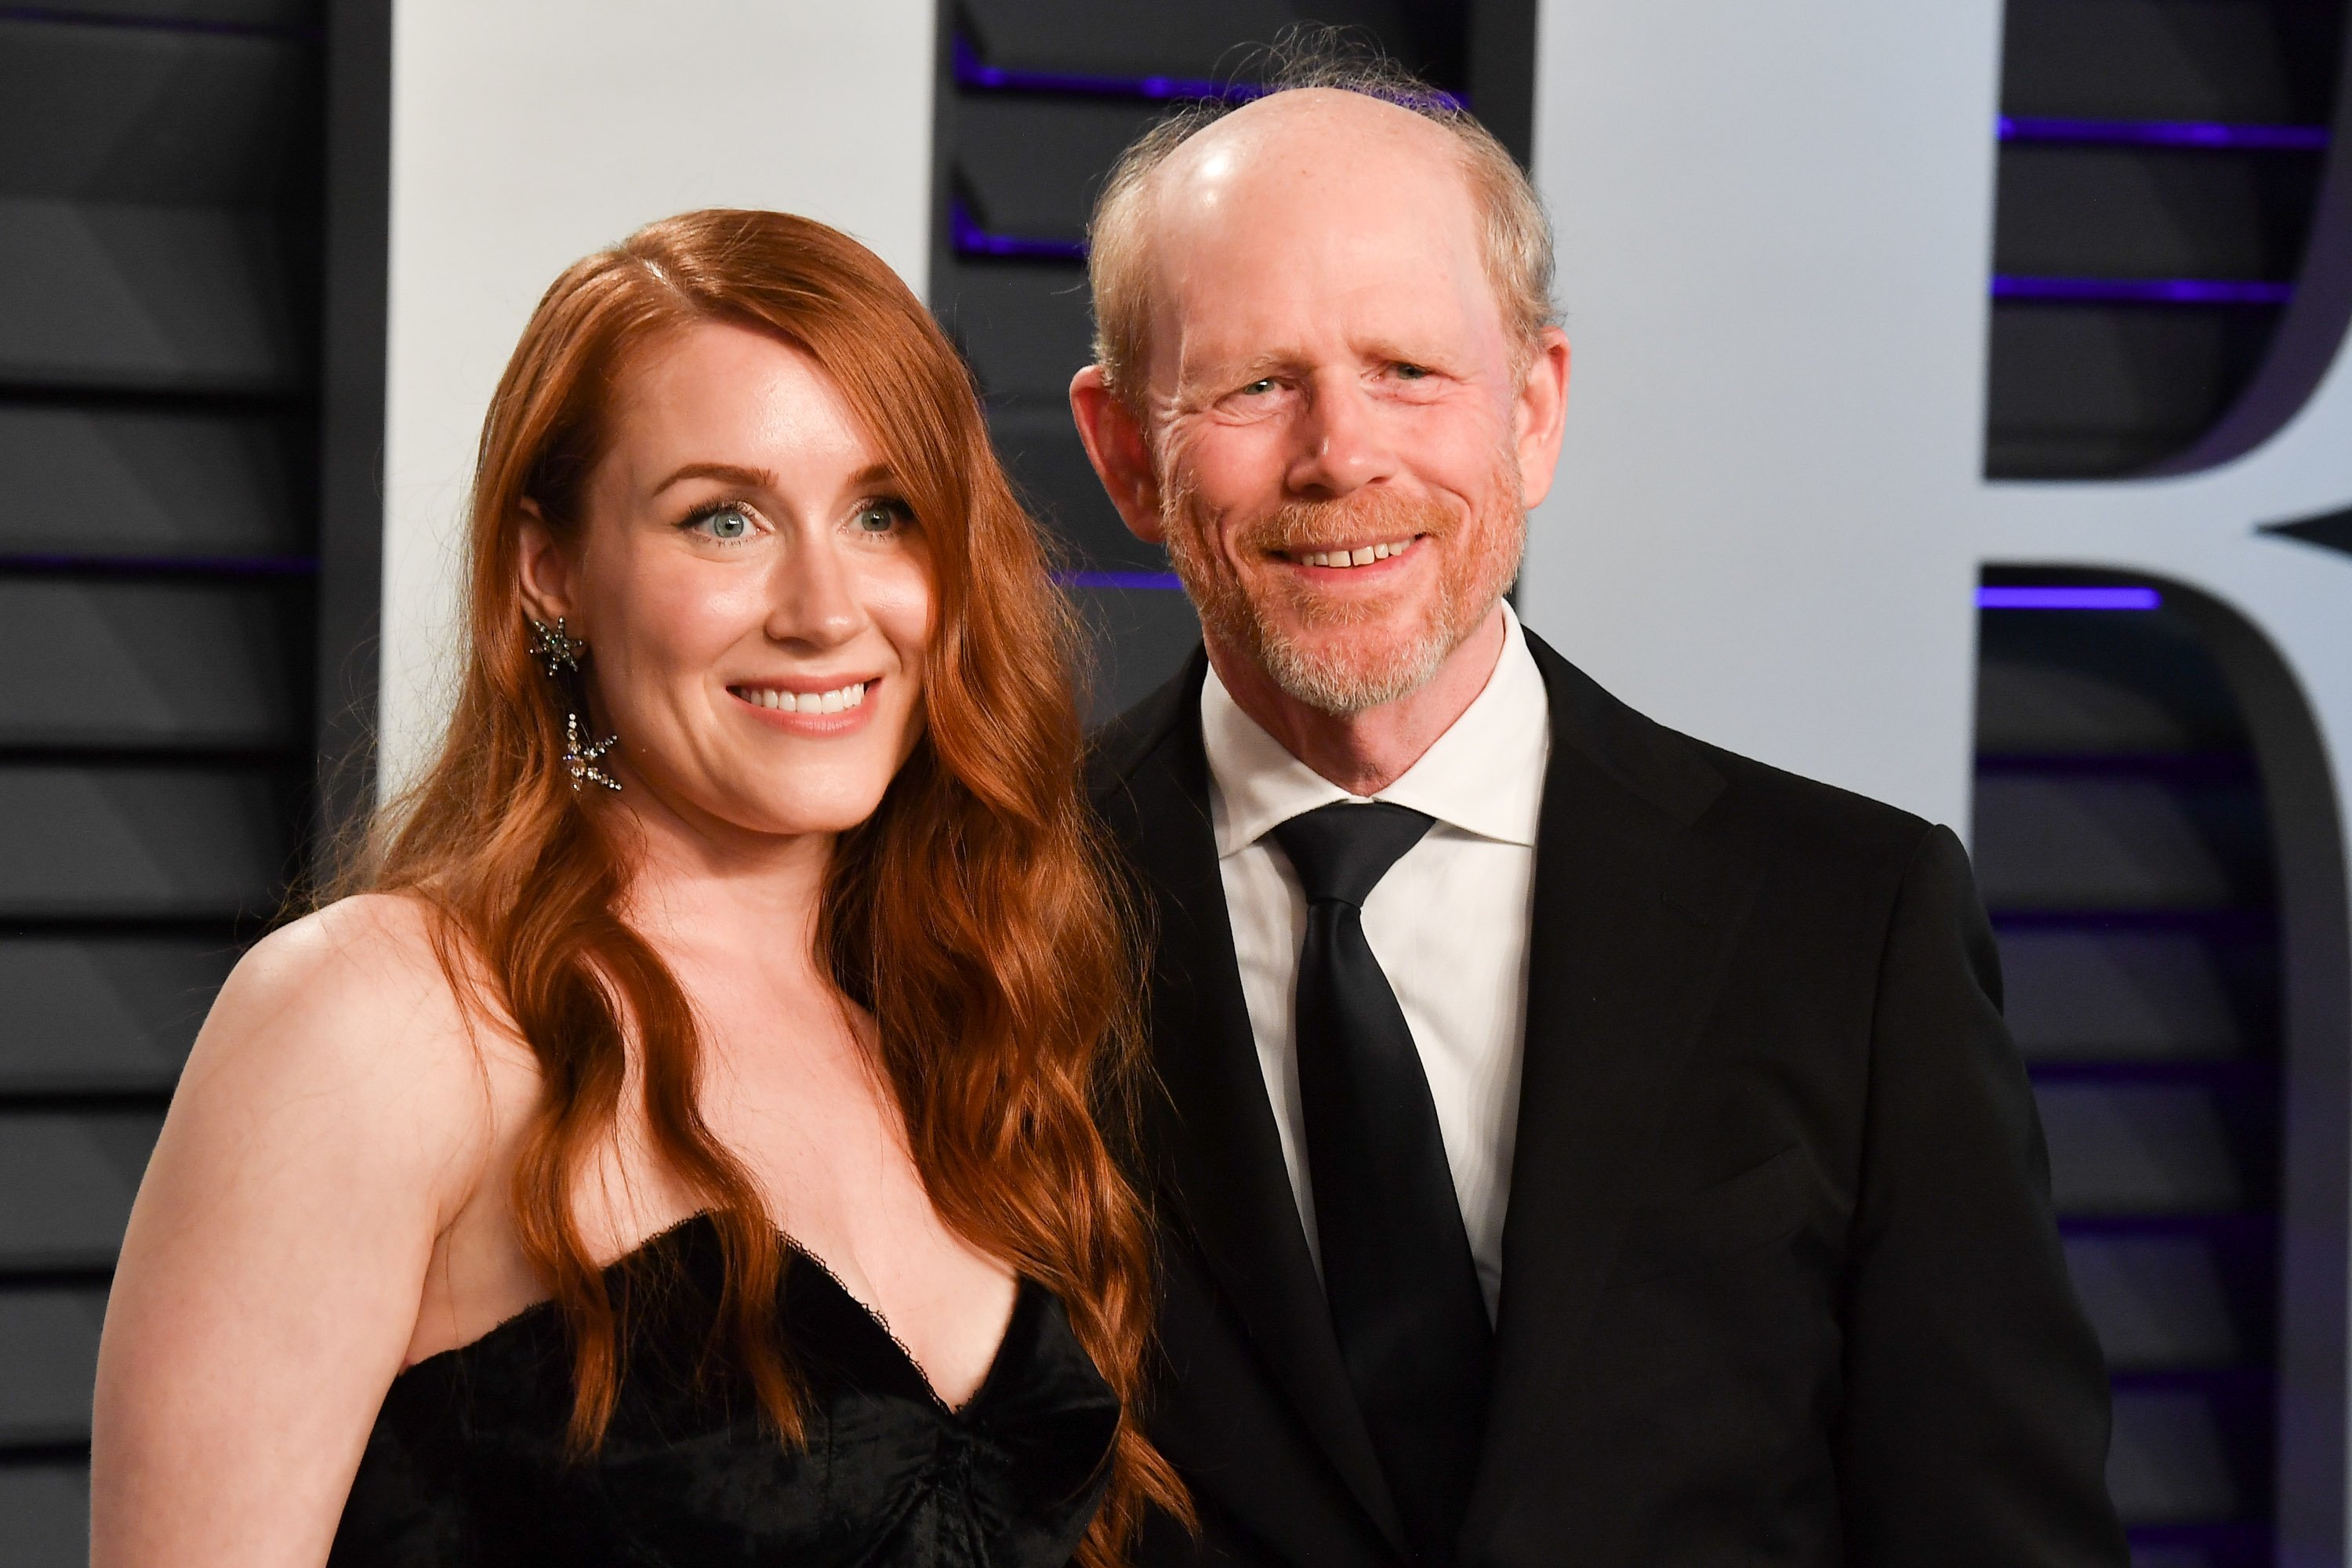 Paige Howard and Ron Howard attend the 2019 Vanity Fair Oscar Party hosted by Radhika Jones at Wallis Annenberg Center for the Performing Arts on February 24, 2019 in Beverly Hills, California | Source: Getty Images 